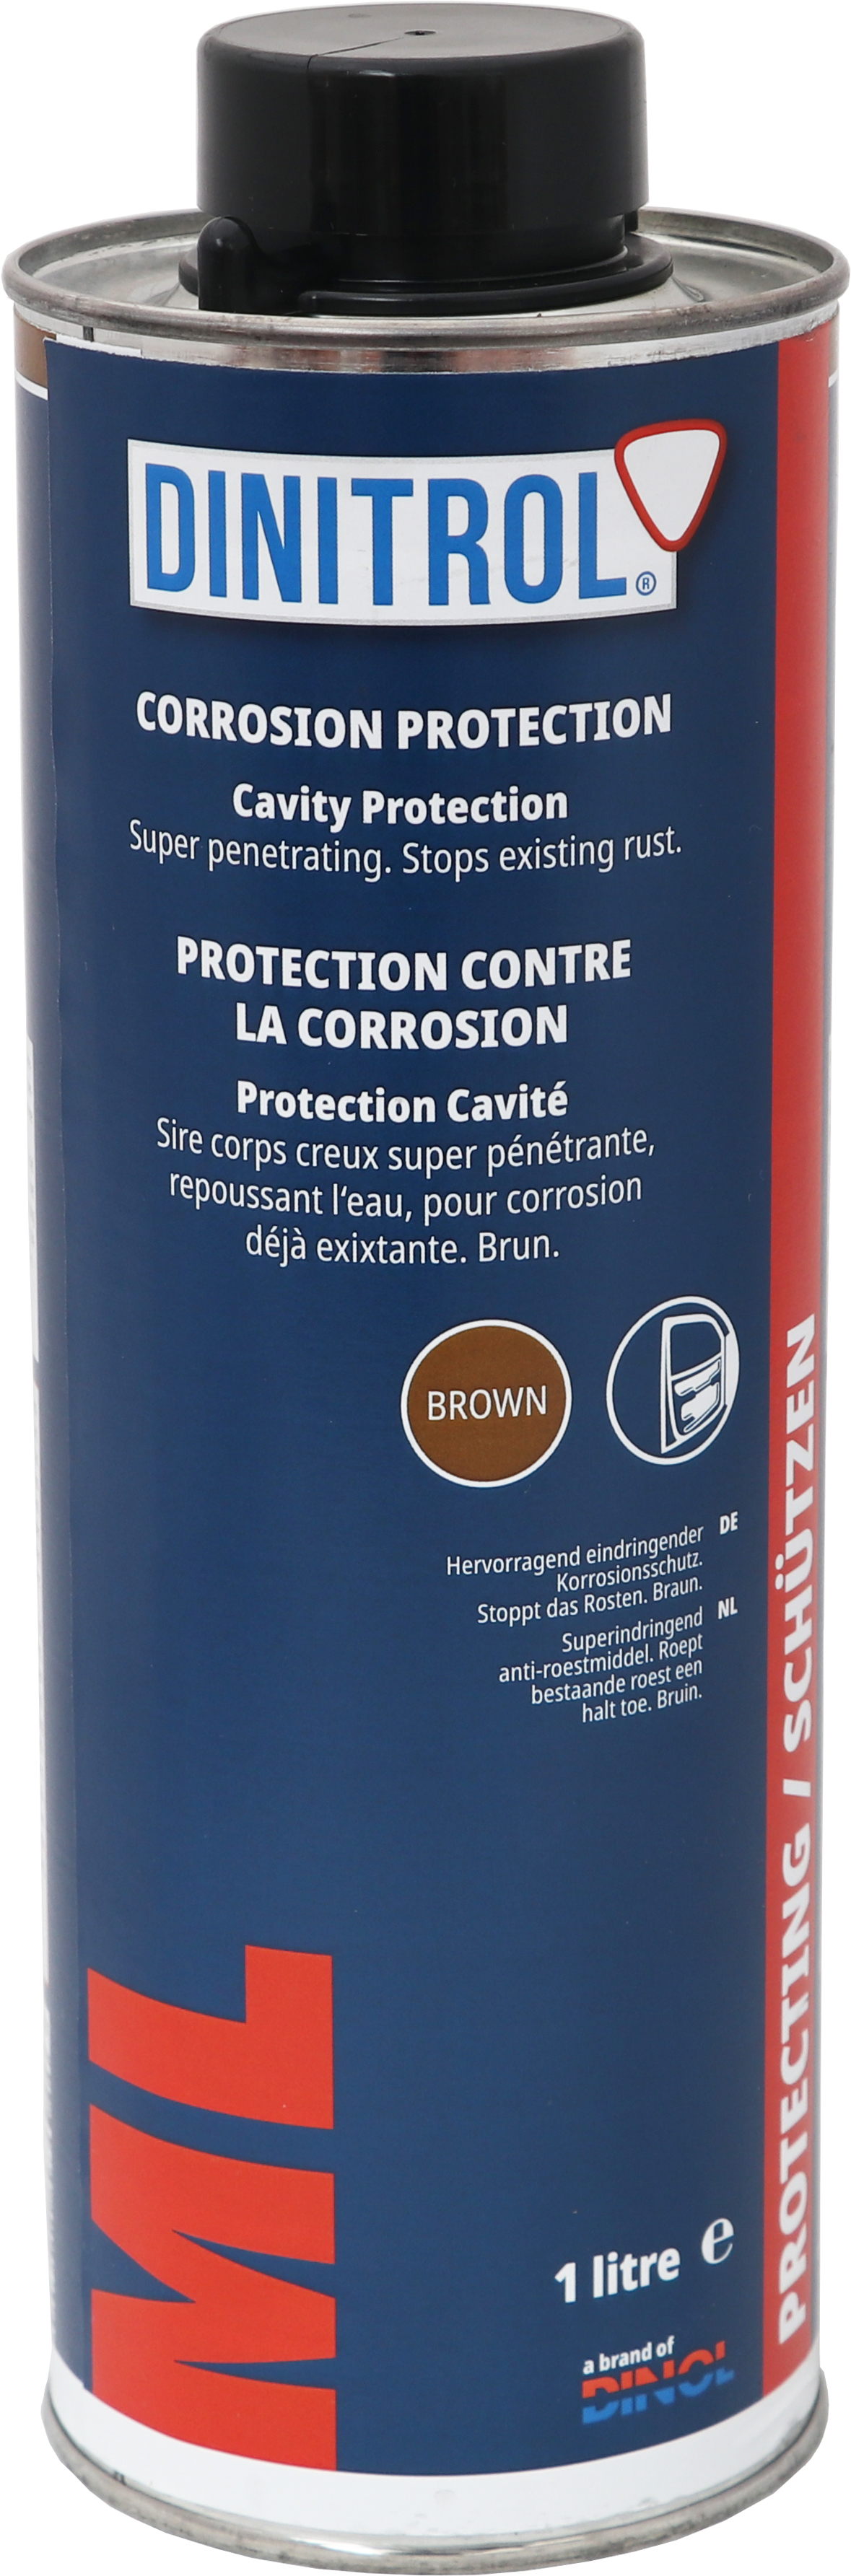 Cire corps creux WAX PROTECT